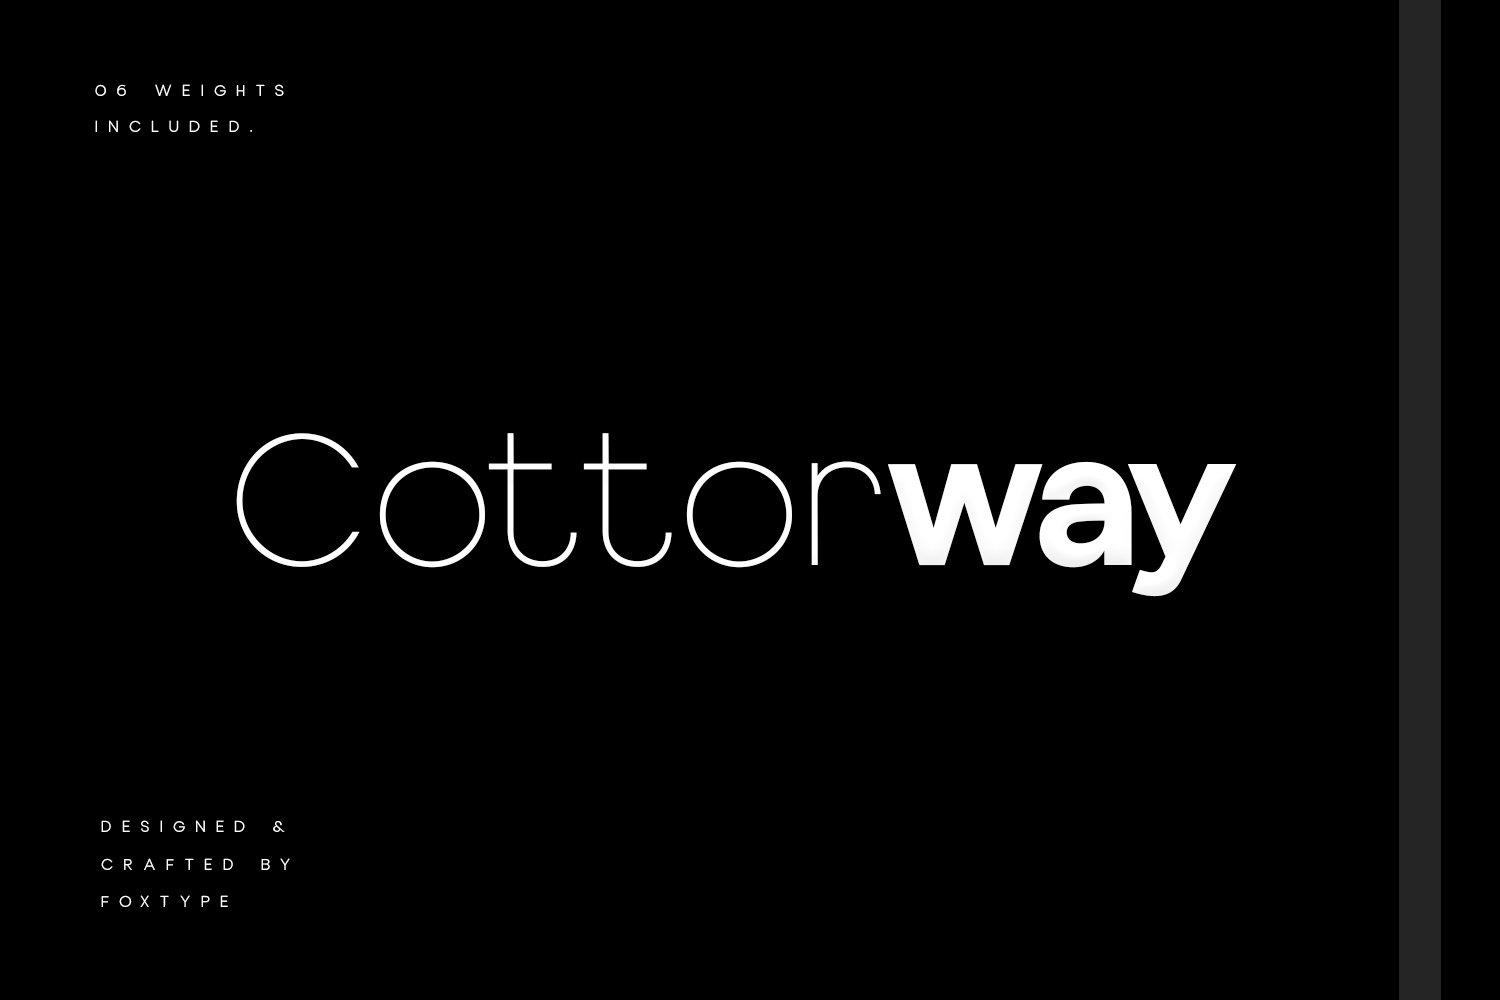 Cottorway Display Typeface cover image.